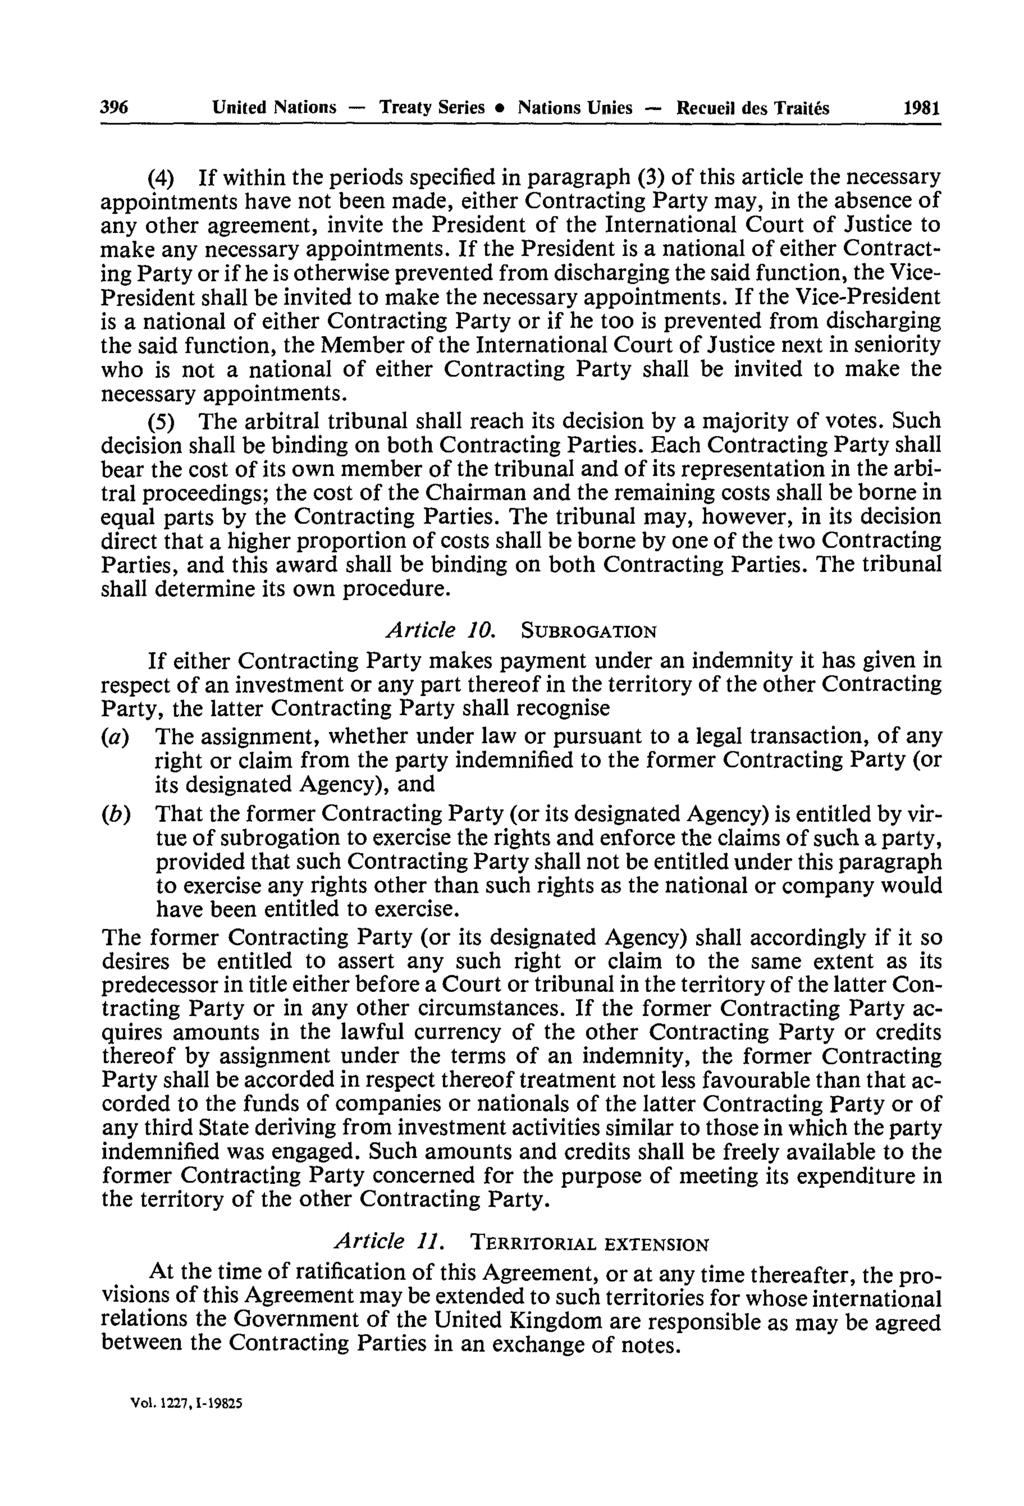 396 United Nations Treaty Series Nations Unies Recueil des Traités 1981 (4) If within the periods specified in paragraph (3) of this article the necessary appointments have not been made, either